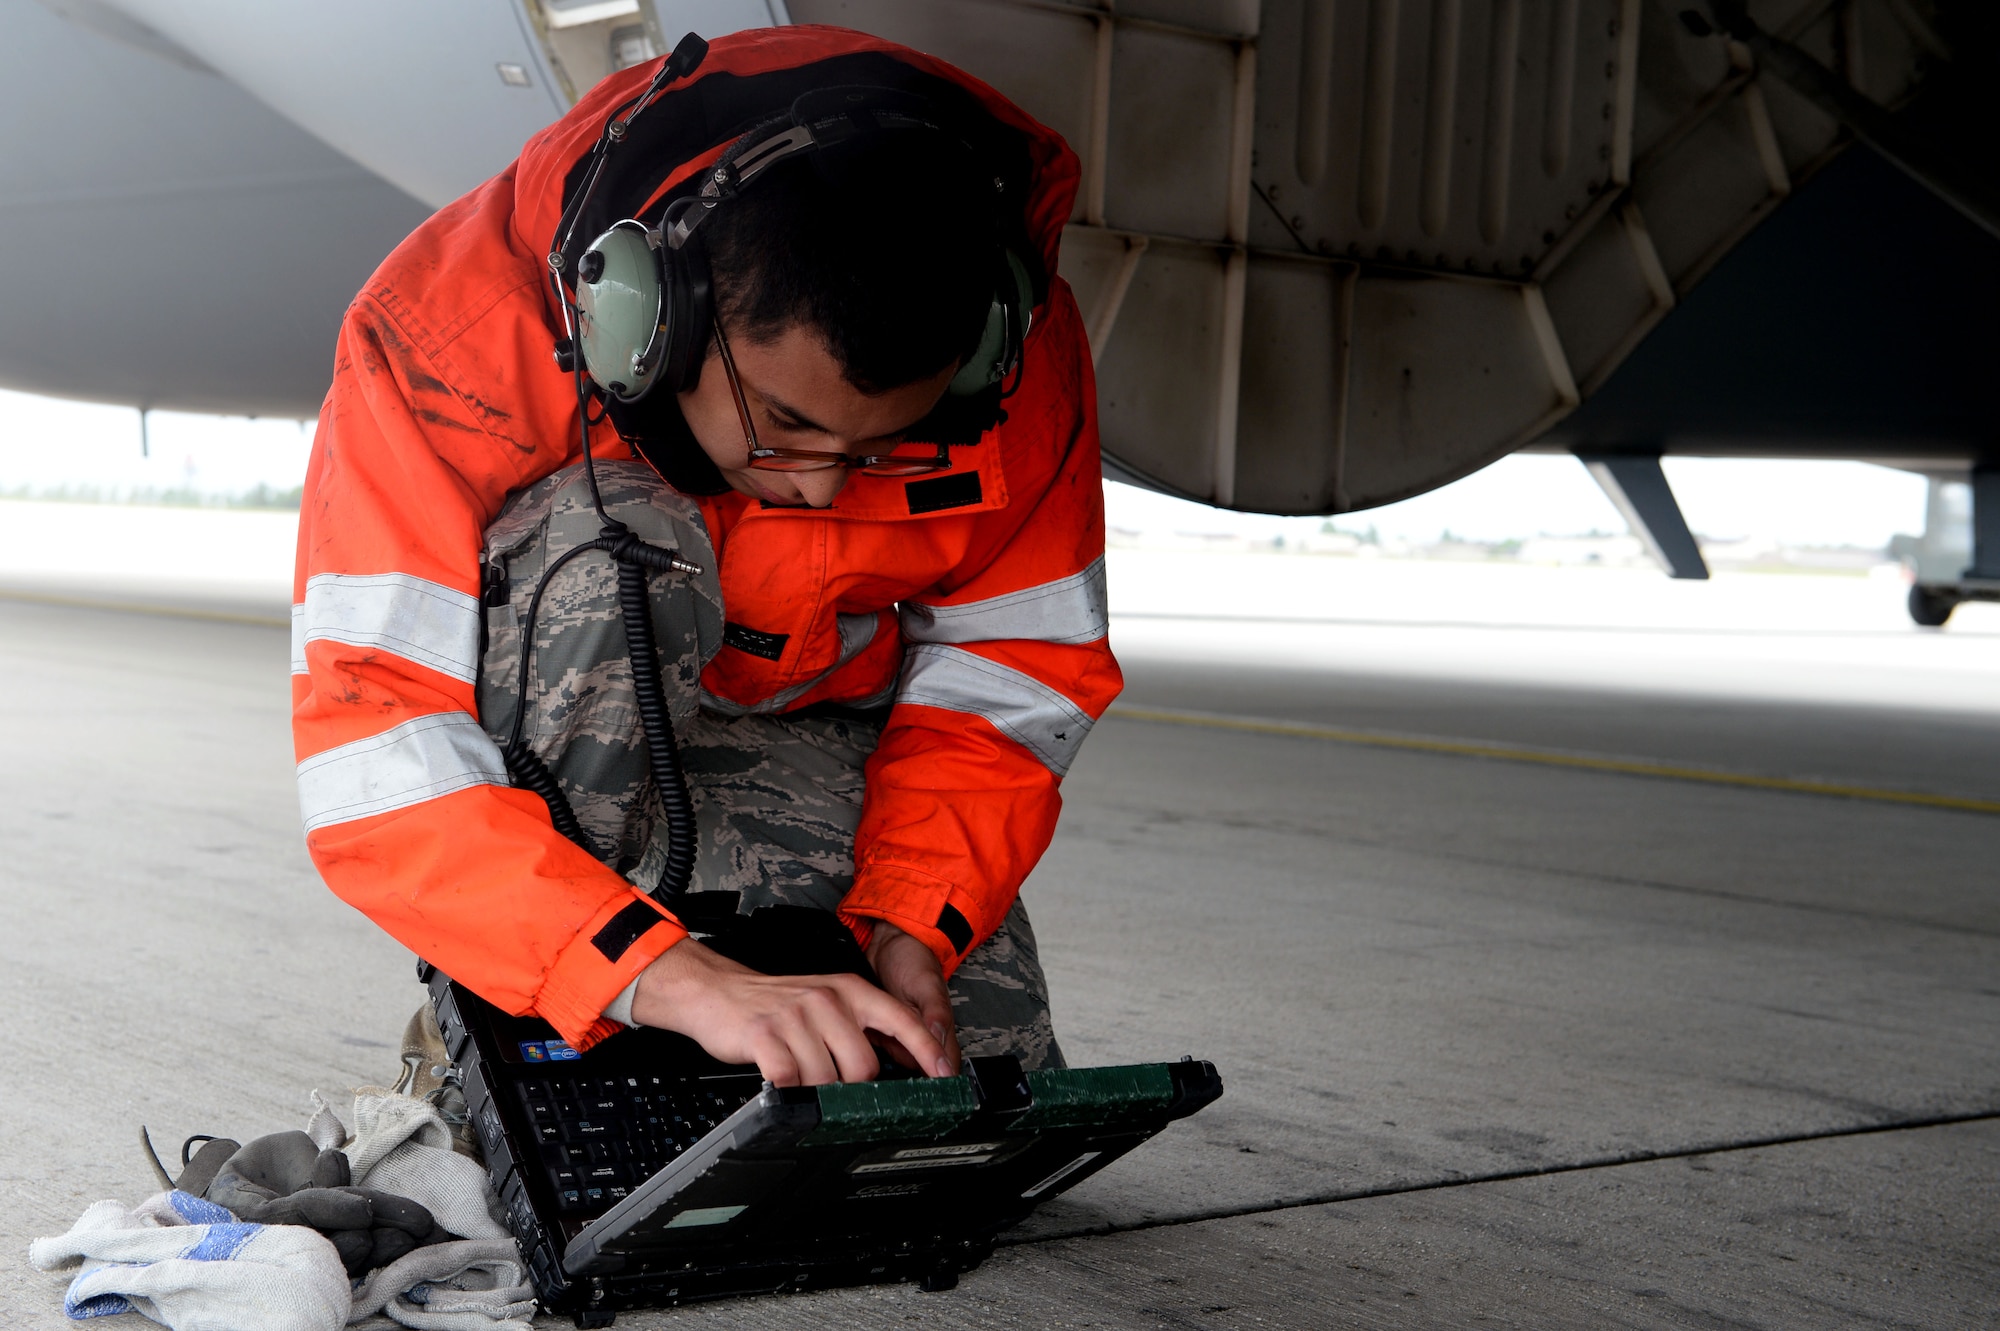 U.S. Air Force Senior Airman Nestor Fraga, 726th Air Mobility Squadron crew chief from Crossville, Tenn., references his Digital Technical Order System during a post-flight inspection of a U.S. Air Force C-17 Globemaster III Cargo Aircraft at Spangdahlem Air Base, Germany, May 7, 2014. Crew chiefs use their DTOS for reference to all maintenance practices. (U.S. Air Force photo by Senior Airman Alexis Siekert/Released)